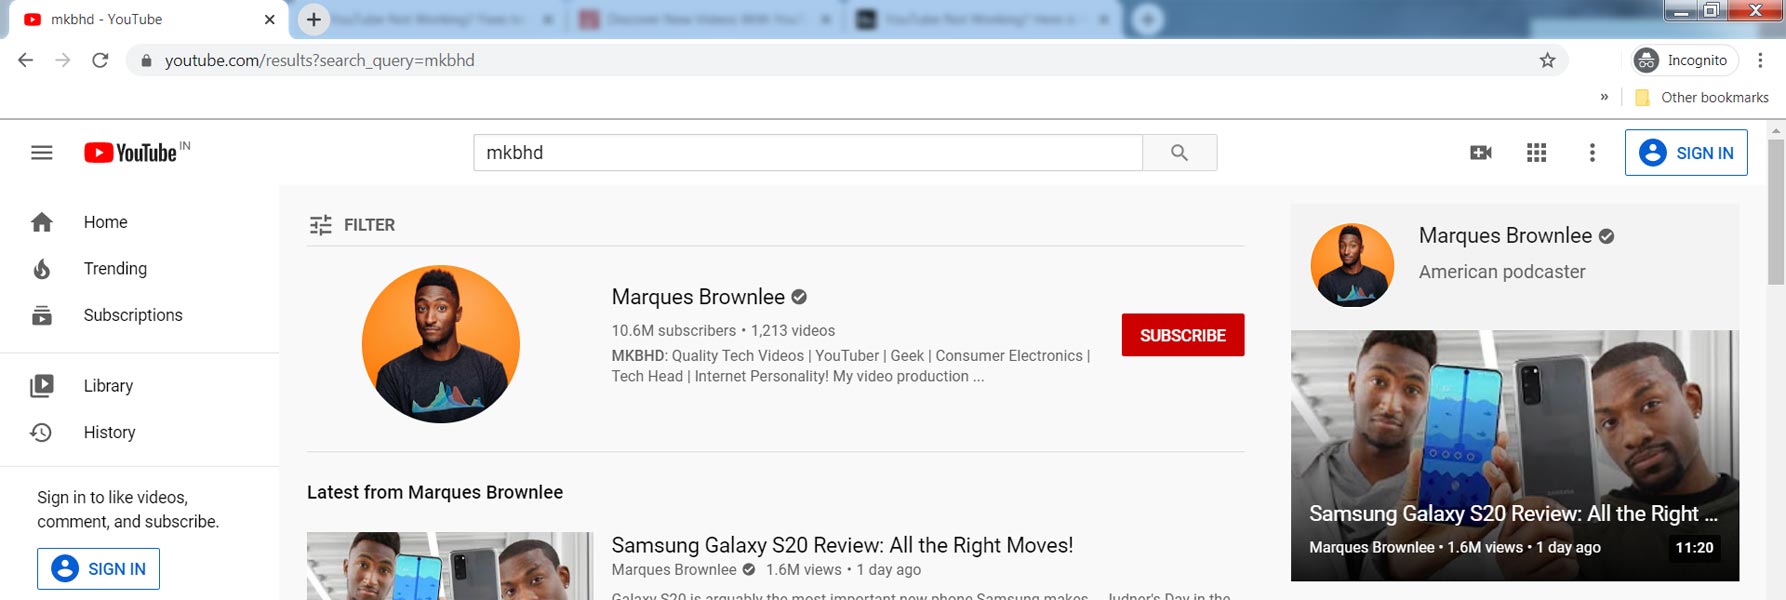 YouTube in Incognito Mode